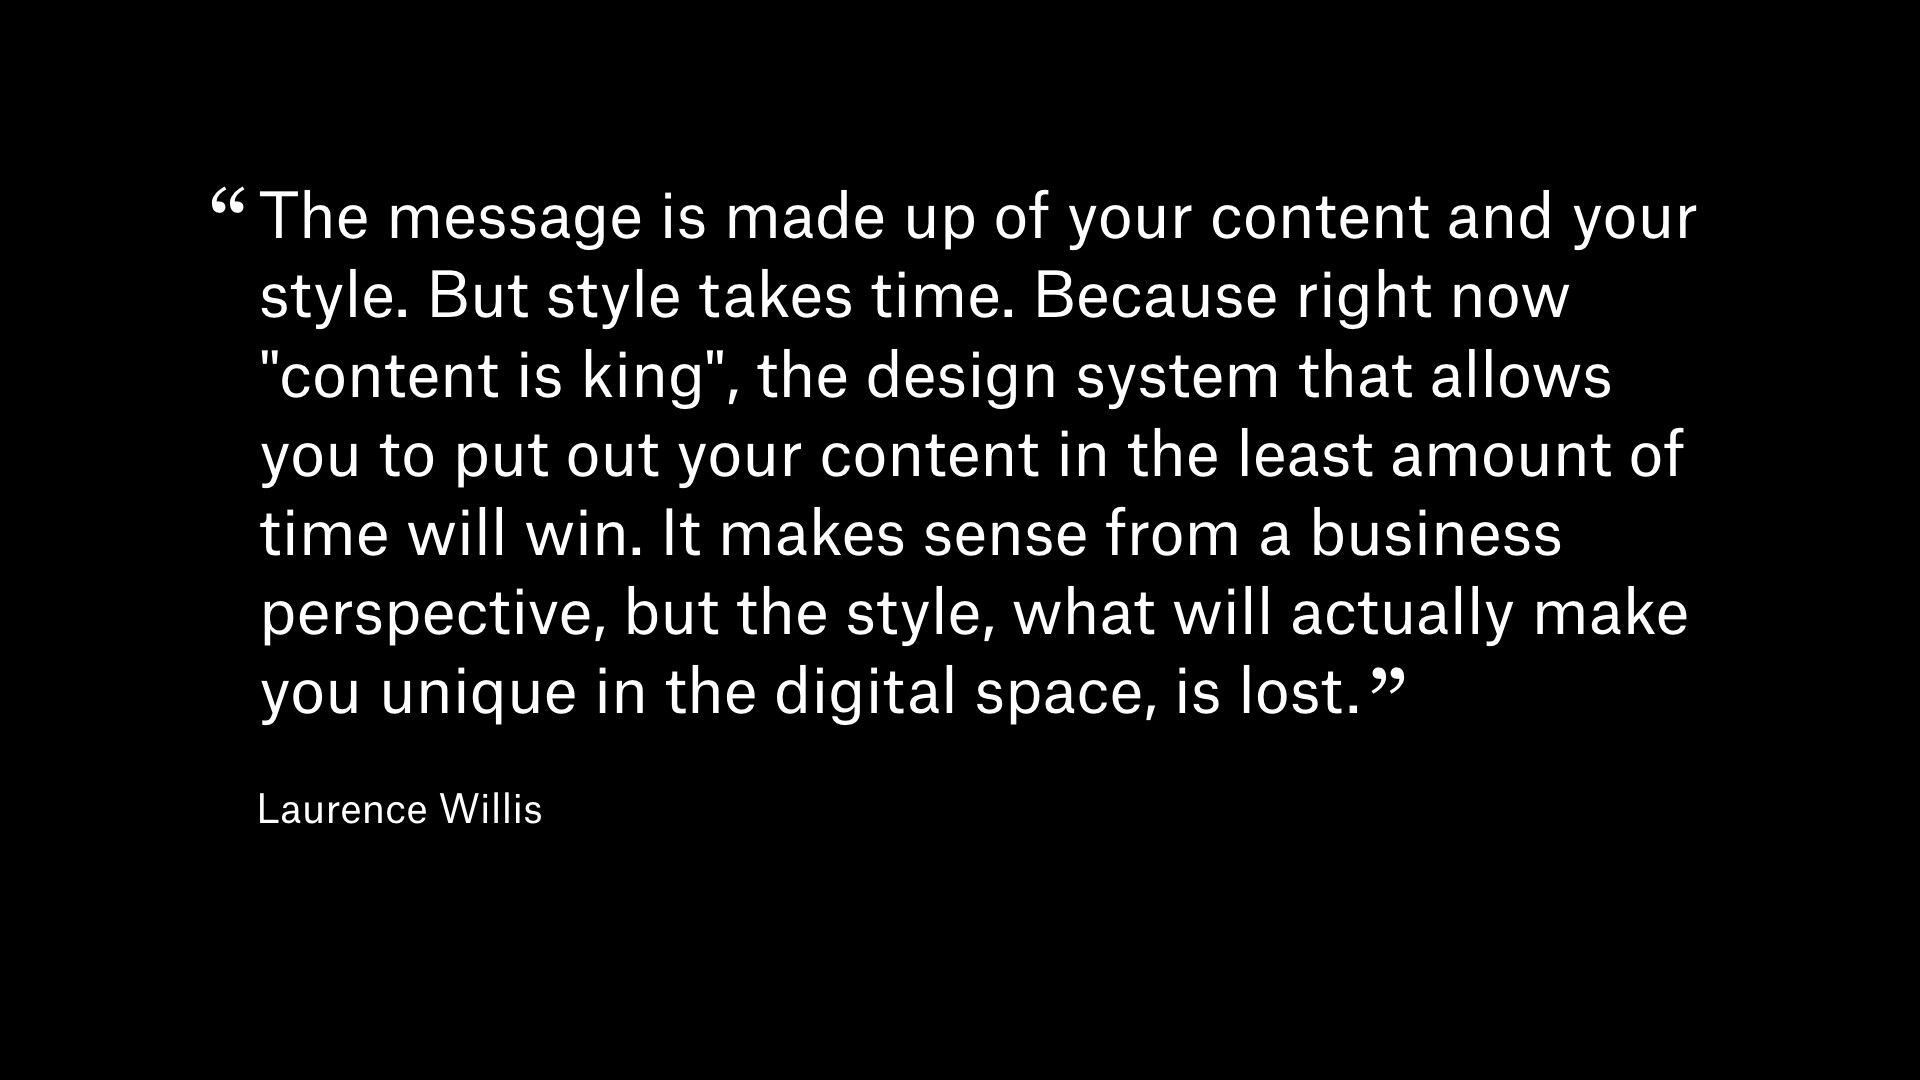 Quote by Lauren Willis: The message is made up of your content and your style. But style takes time. Because right now 'content is king', the design system that allows you to put out your content in the least amount of time will win. It makes sense from a business perspective, but the style, what will actually make you unique in the digital space, is lost.